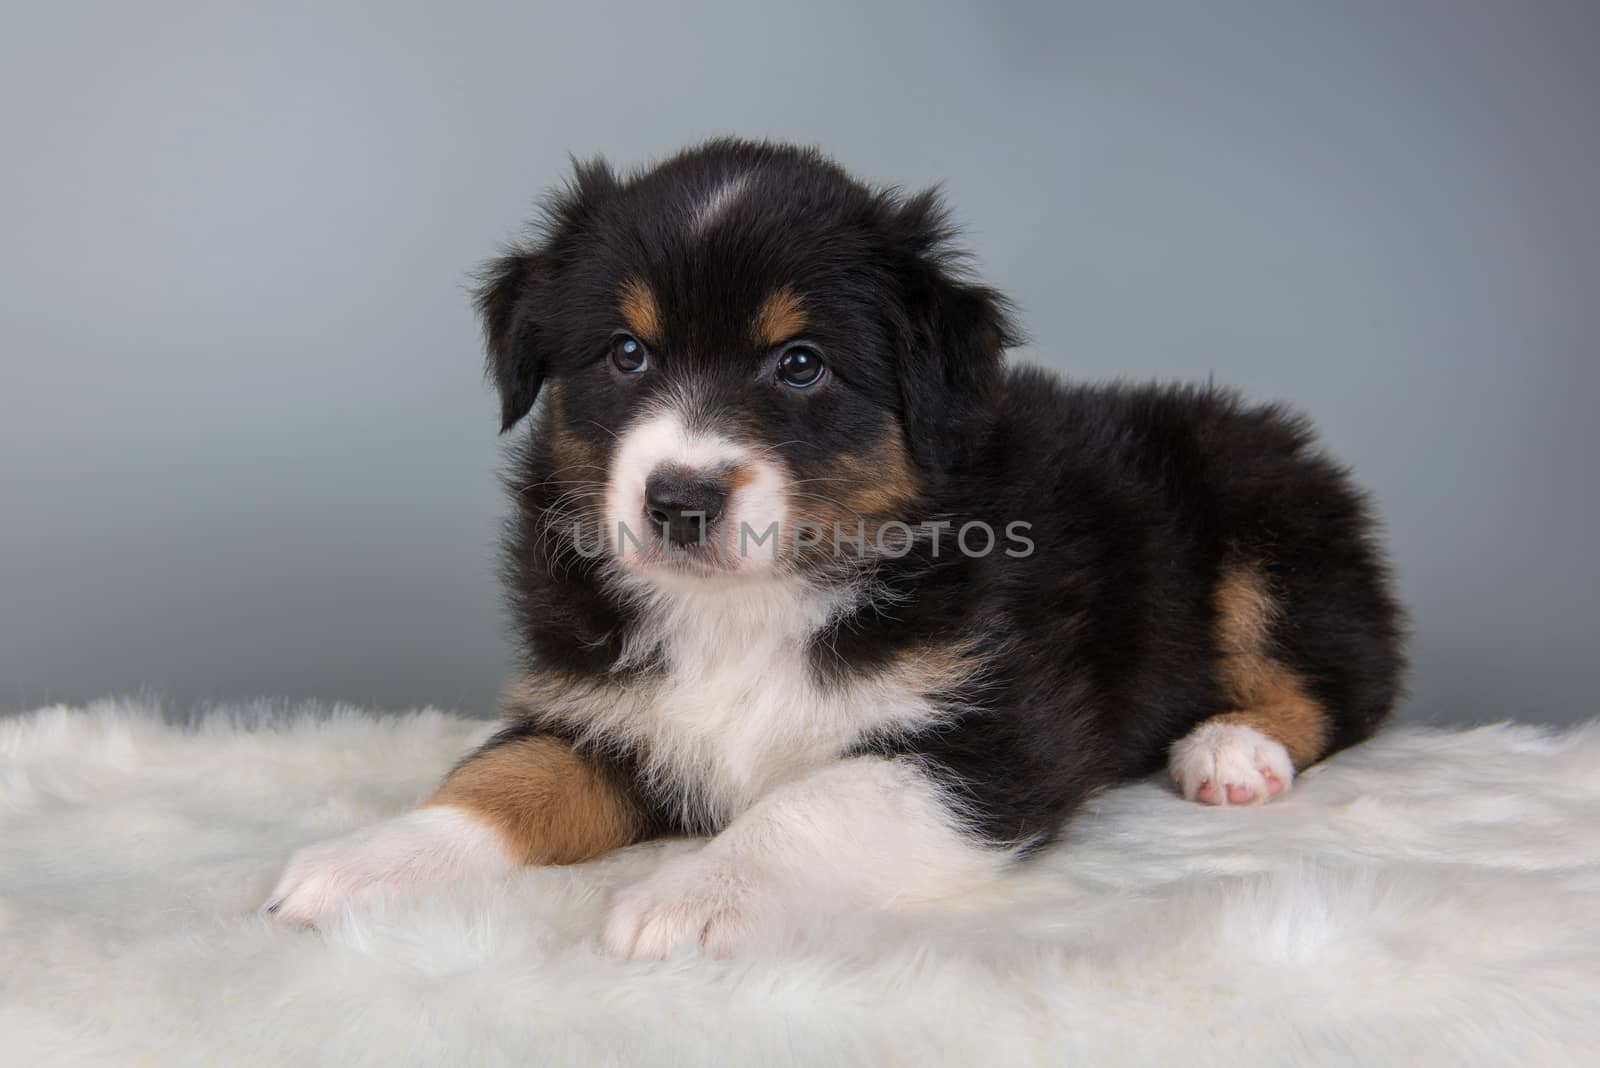 Australian Shepherd puppy portrait. Dog tri-color black, brown and white six weeks old, sitting on light gray background.